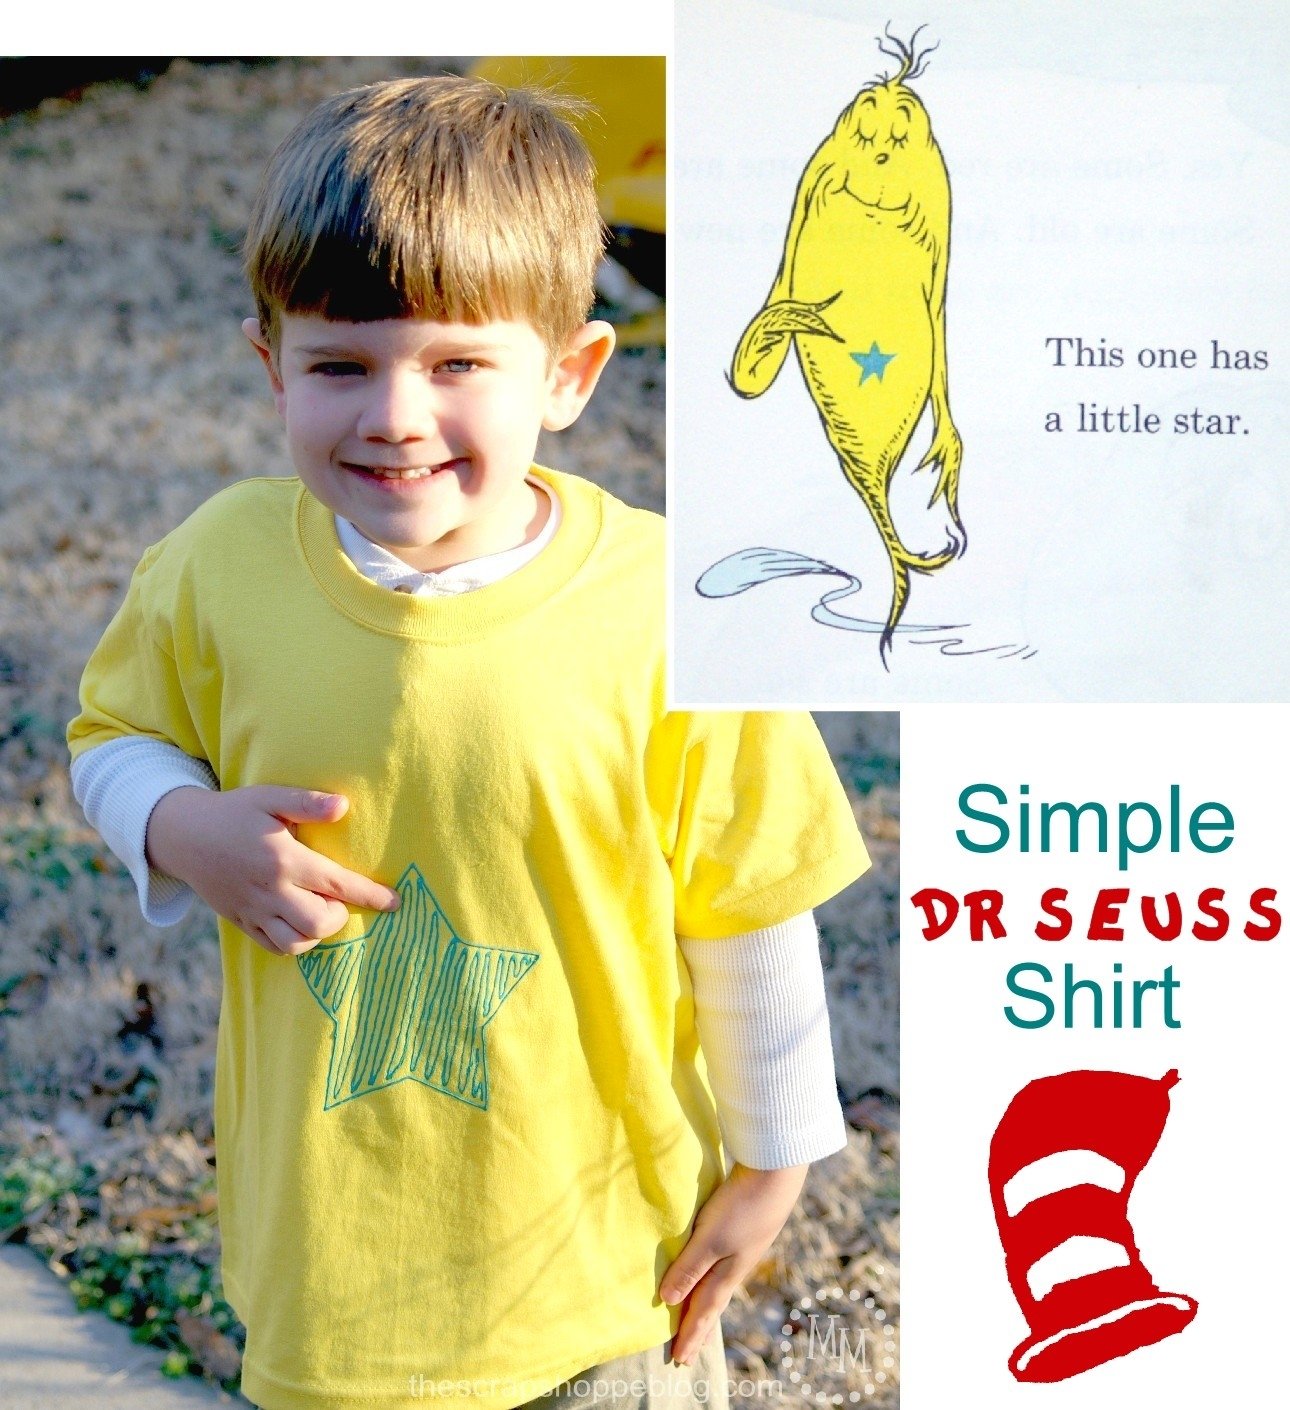 10 Best Dr Seuss Characters Costume Ideas simple dr seuss shirt the scrap shoppe dr seuss characters costumes 1 2022